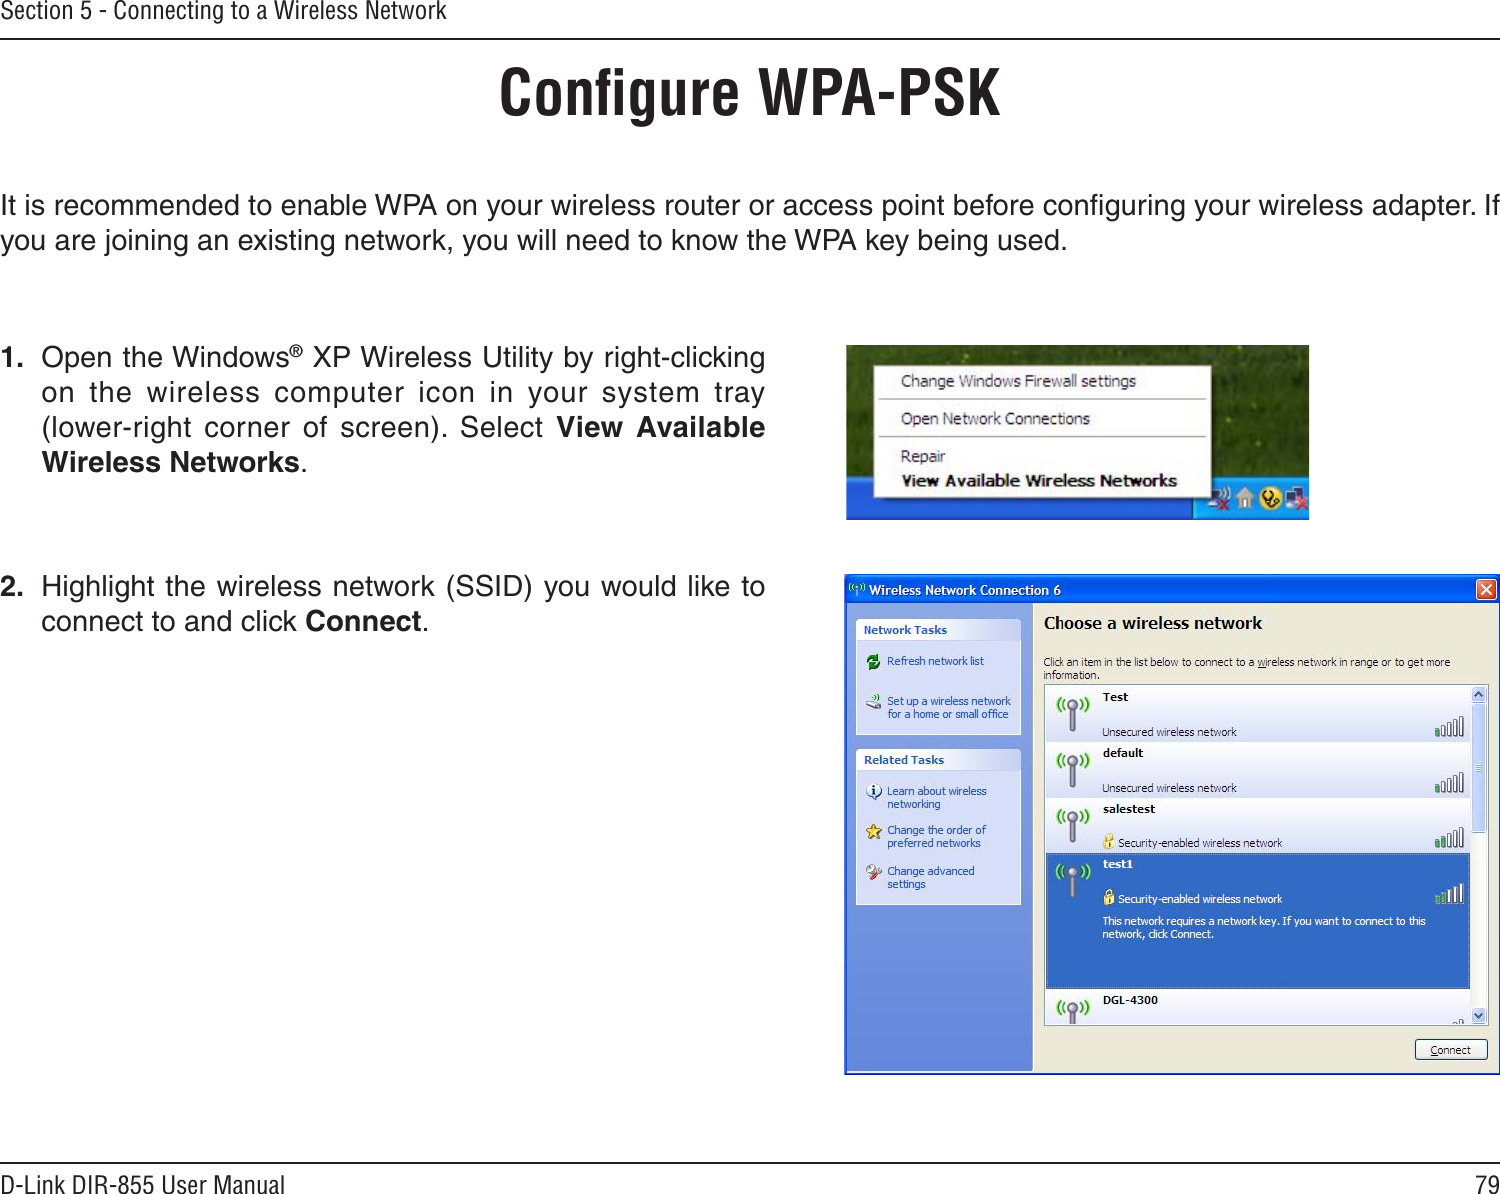 79D-Link DIR-855 User ManualSection 5 - Connecting to a Wireless NetworkConﬁgure WPA-PSKIt is recommended to enable WPA on your wireless router or access point before conﬁguring your wireless adapter. If you are joining an existing network, you will need to know the WPA key being used.2.  Highlight the wireless network (SSID) you would like to connect to and click Connect.1.  Open the Windows® XP Wireless Utility by right-clicking on  the  wireless  computer  icon  in  your  system  tray  (lower-right  corner  of  screen).  Select  View  Available Wireless Networks. 